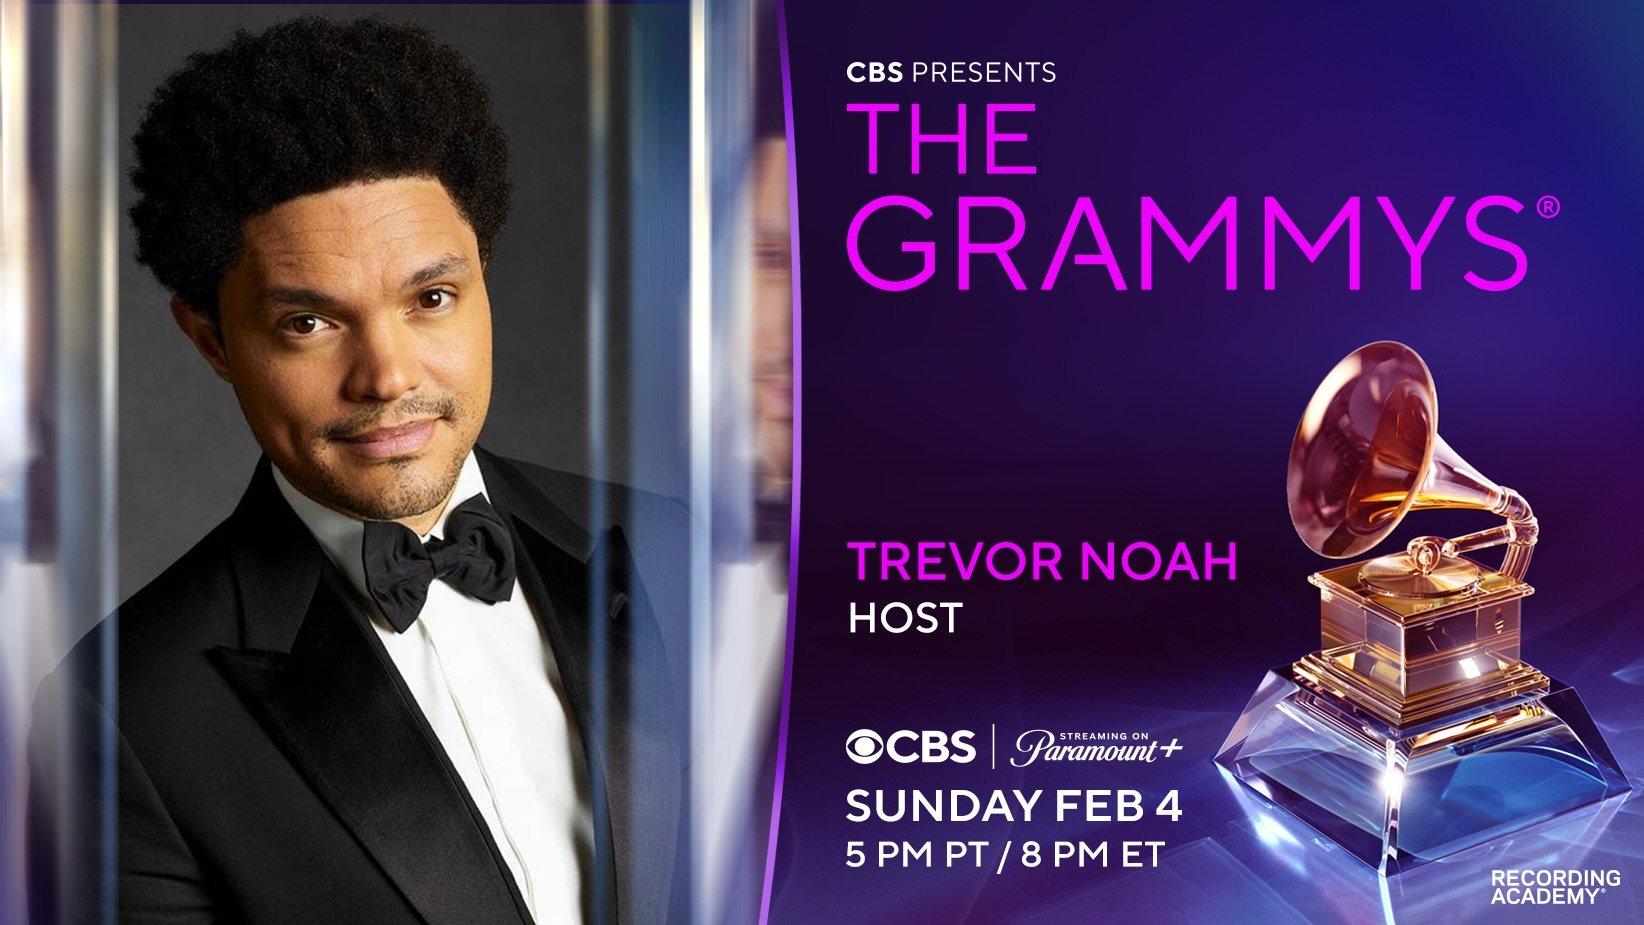 Trevor Noah will host the 2024 GRAMMYs, officially known as the 66th GRAMMY Awards, on Sunday, Feb. 4